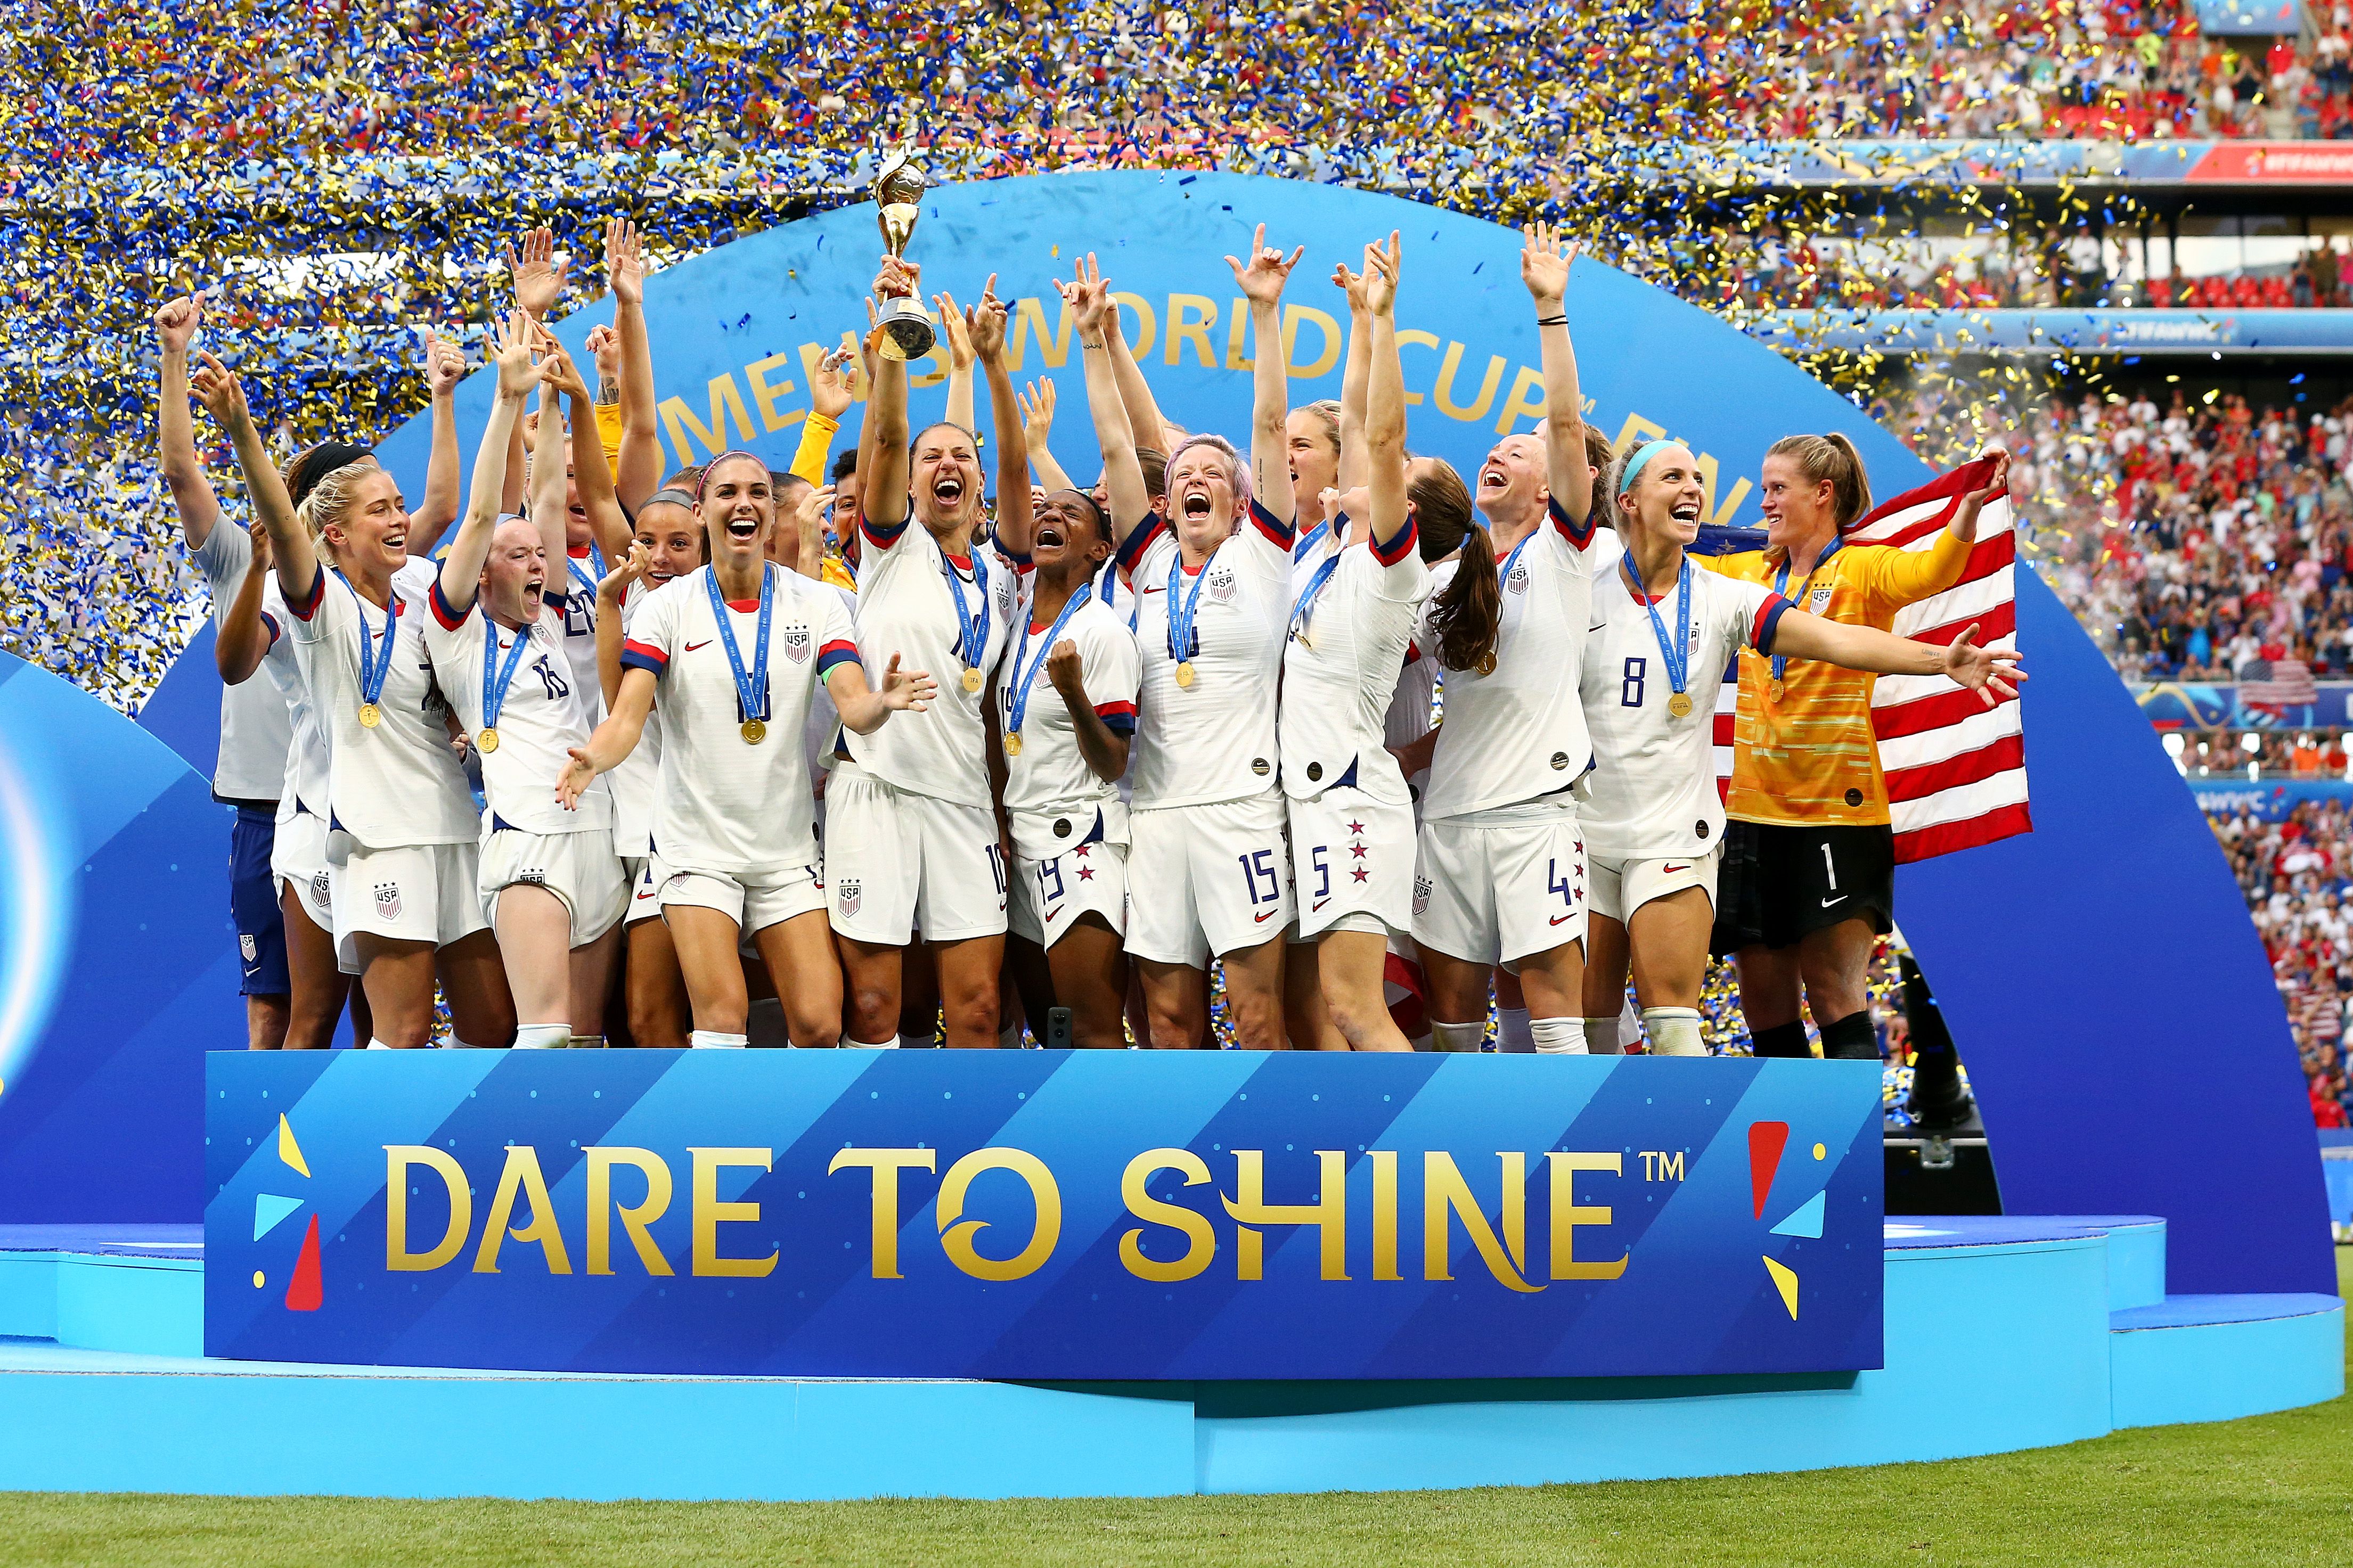 U.S. Women's National Soccer Team celebrating their World Cup title win